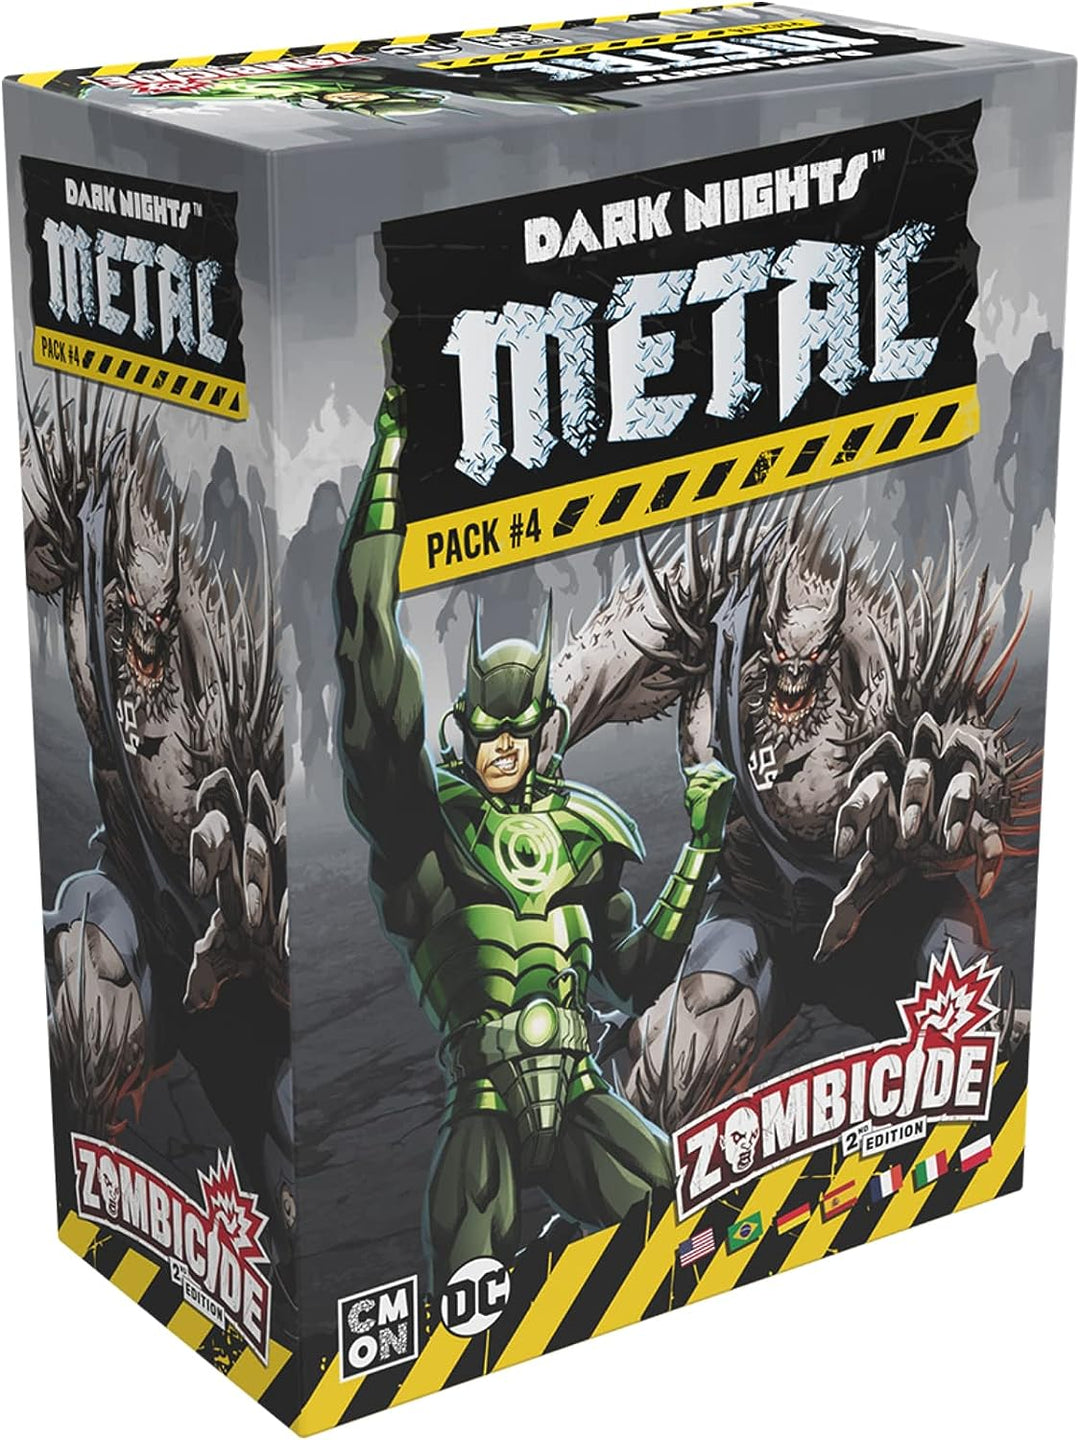 Zombicide 2nd Edition: Dark Night Metal Promo Pack No. 4